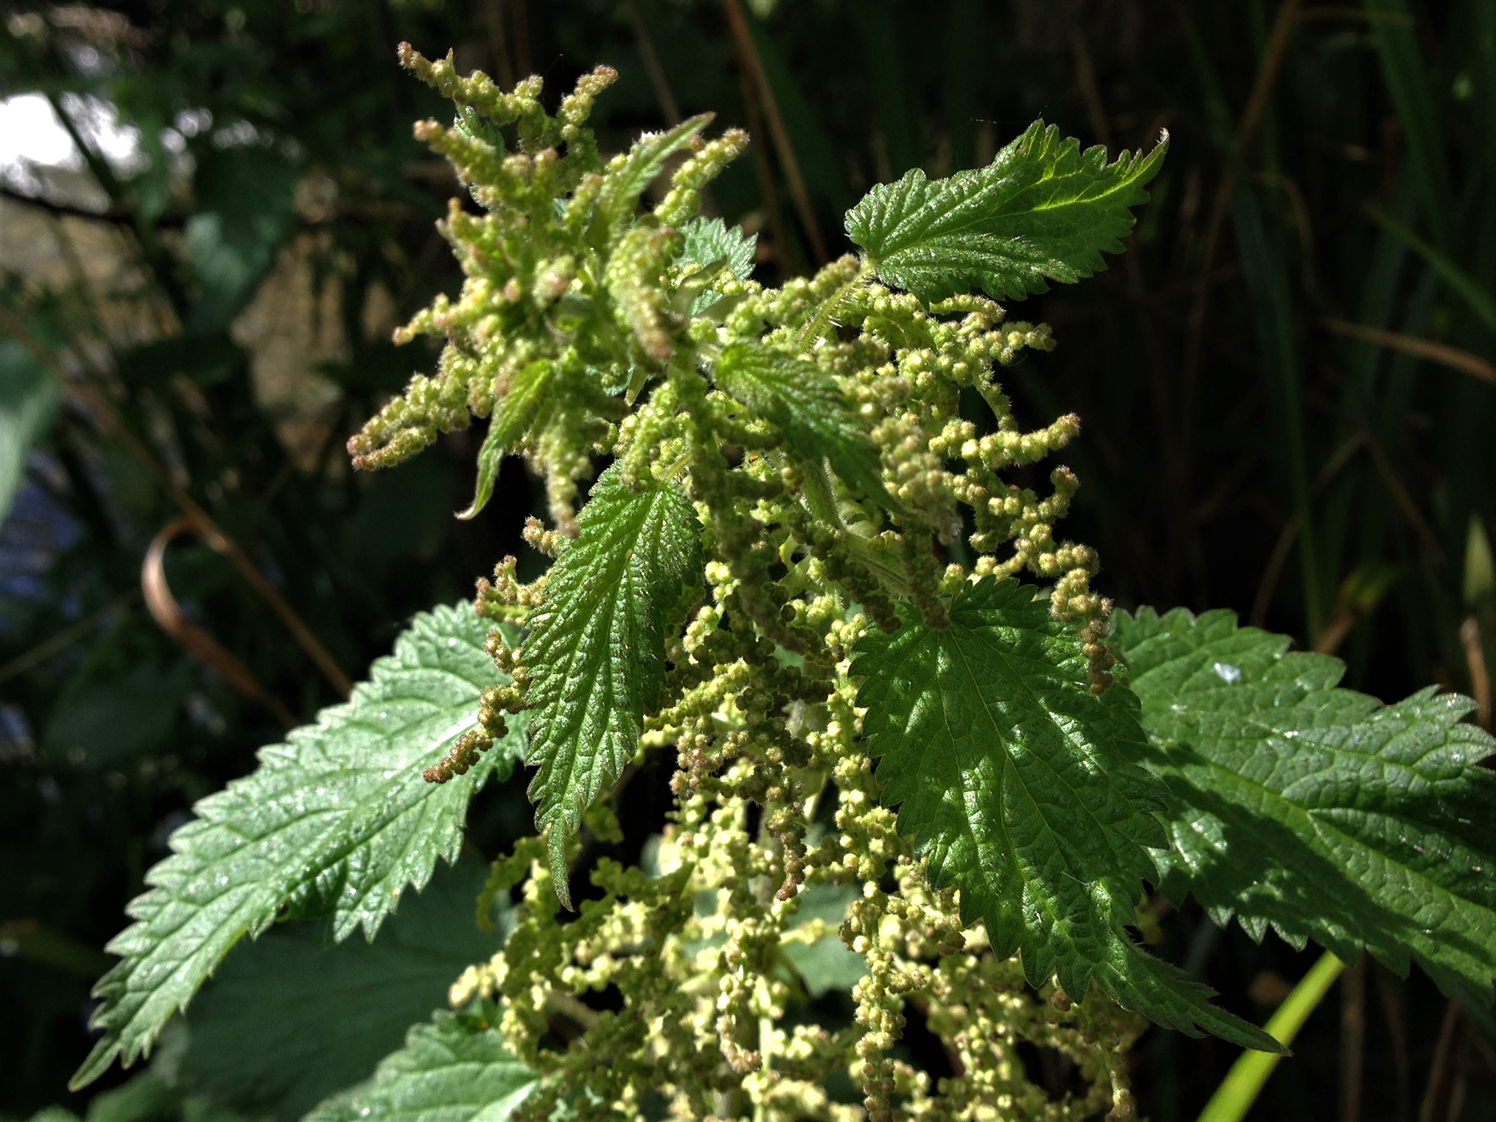 How to Grow and Care for Stinging Nettle